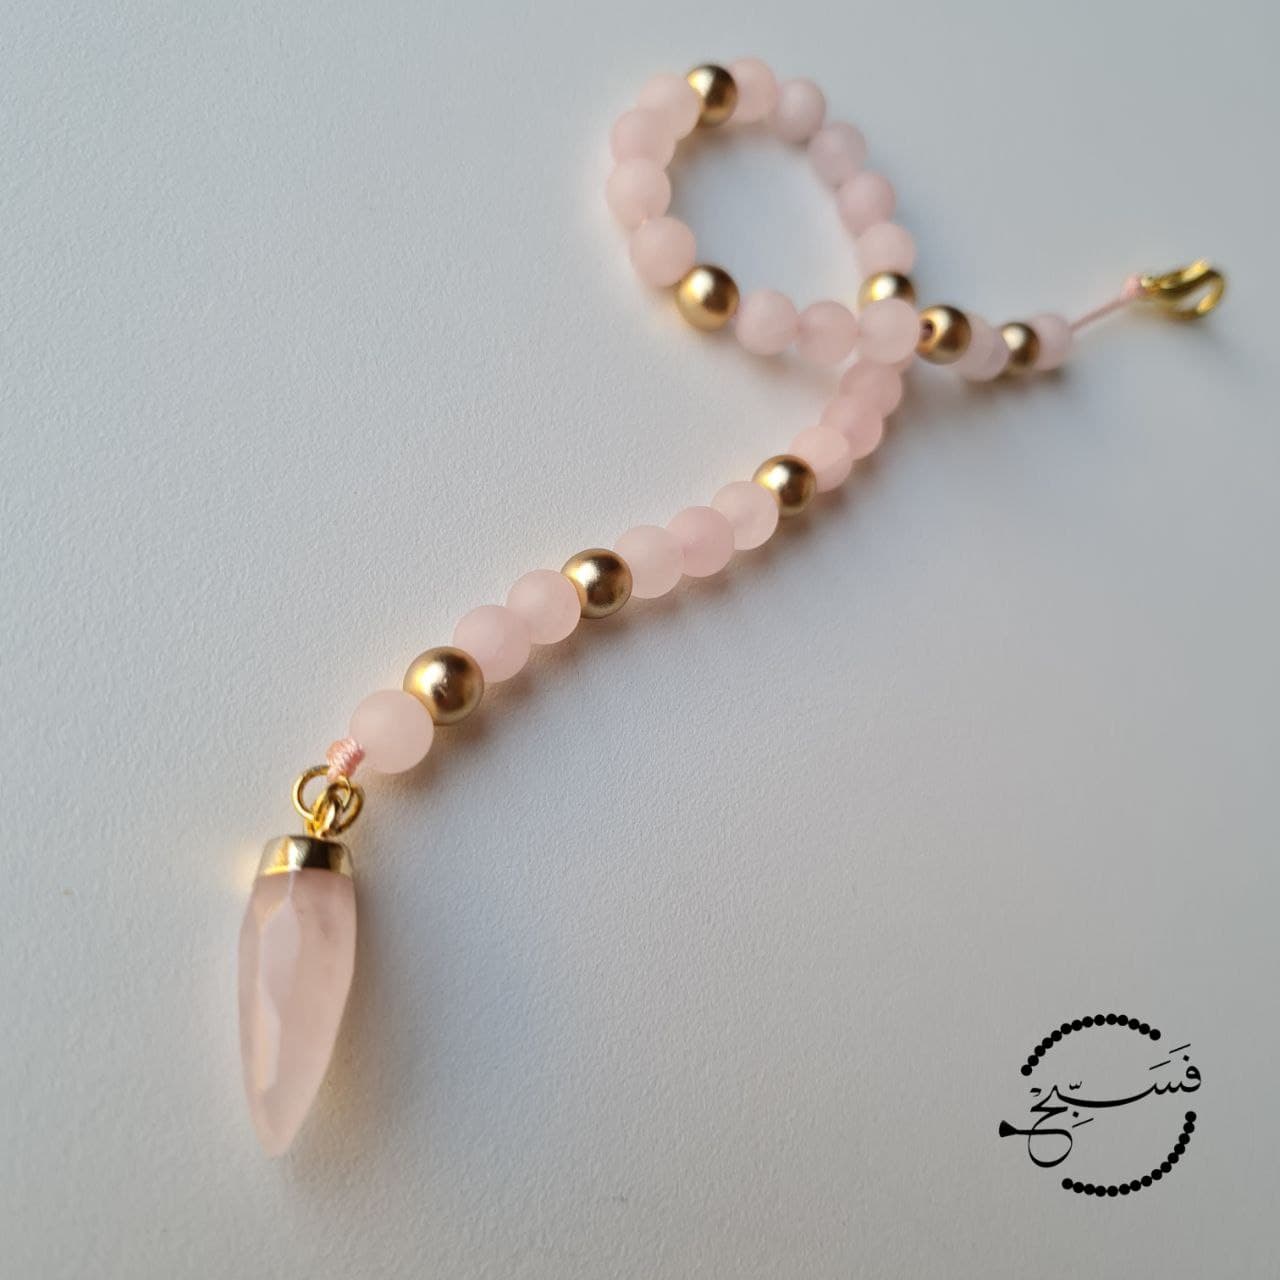 Rose quartz bag charm for dhikr on the go!   33 bead tasbih that can be attached to your bag.   Packaged in a luxurious pouch and a gift box.